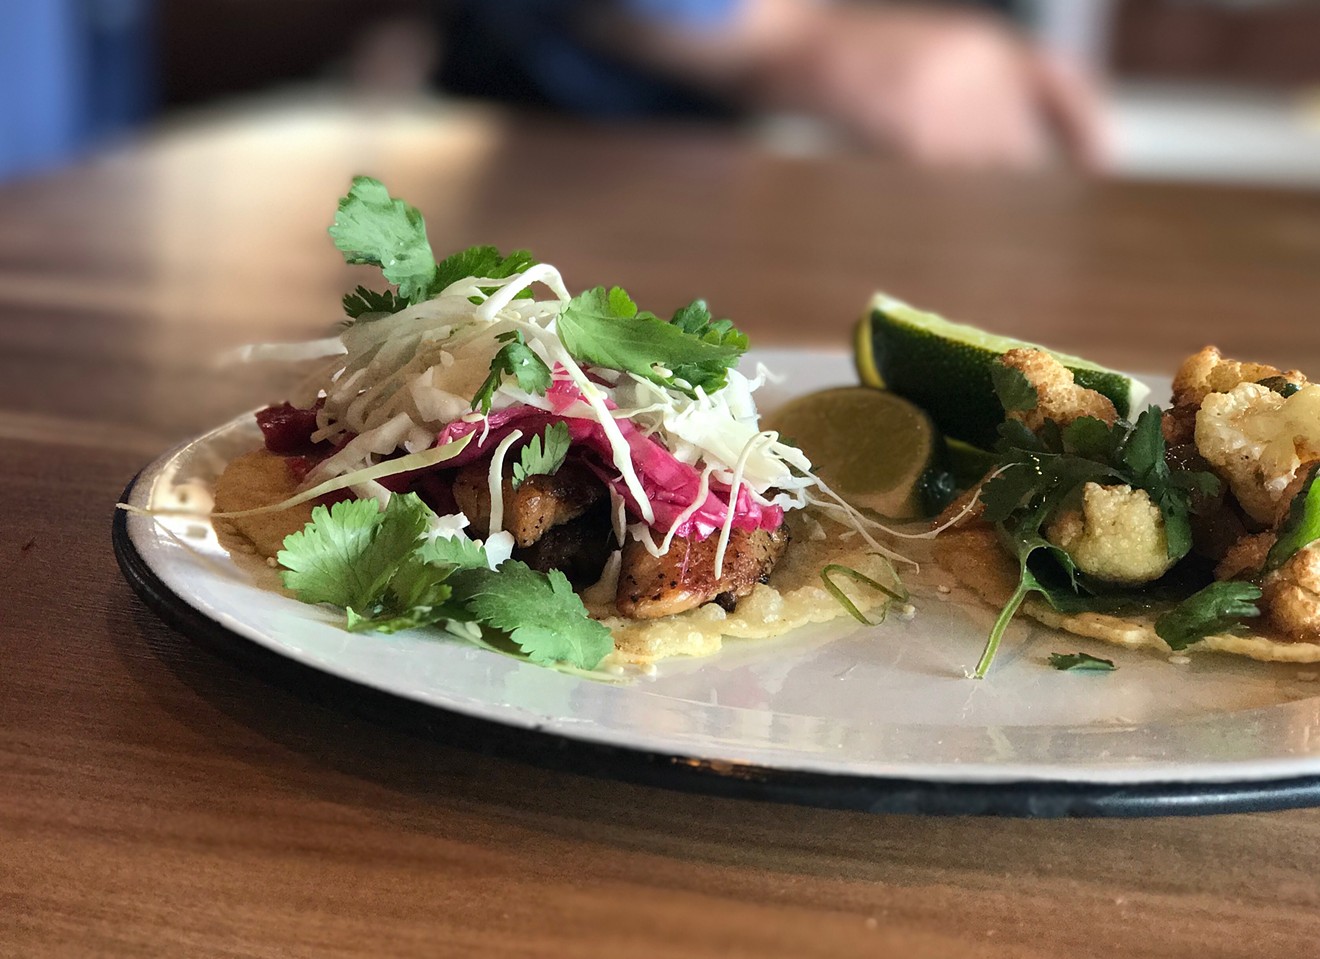 The pork belly taco with raw pickled cabbage, toasted sesame seed, cream and cilantro ($3.85).